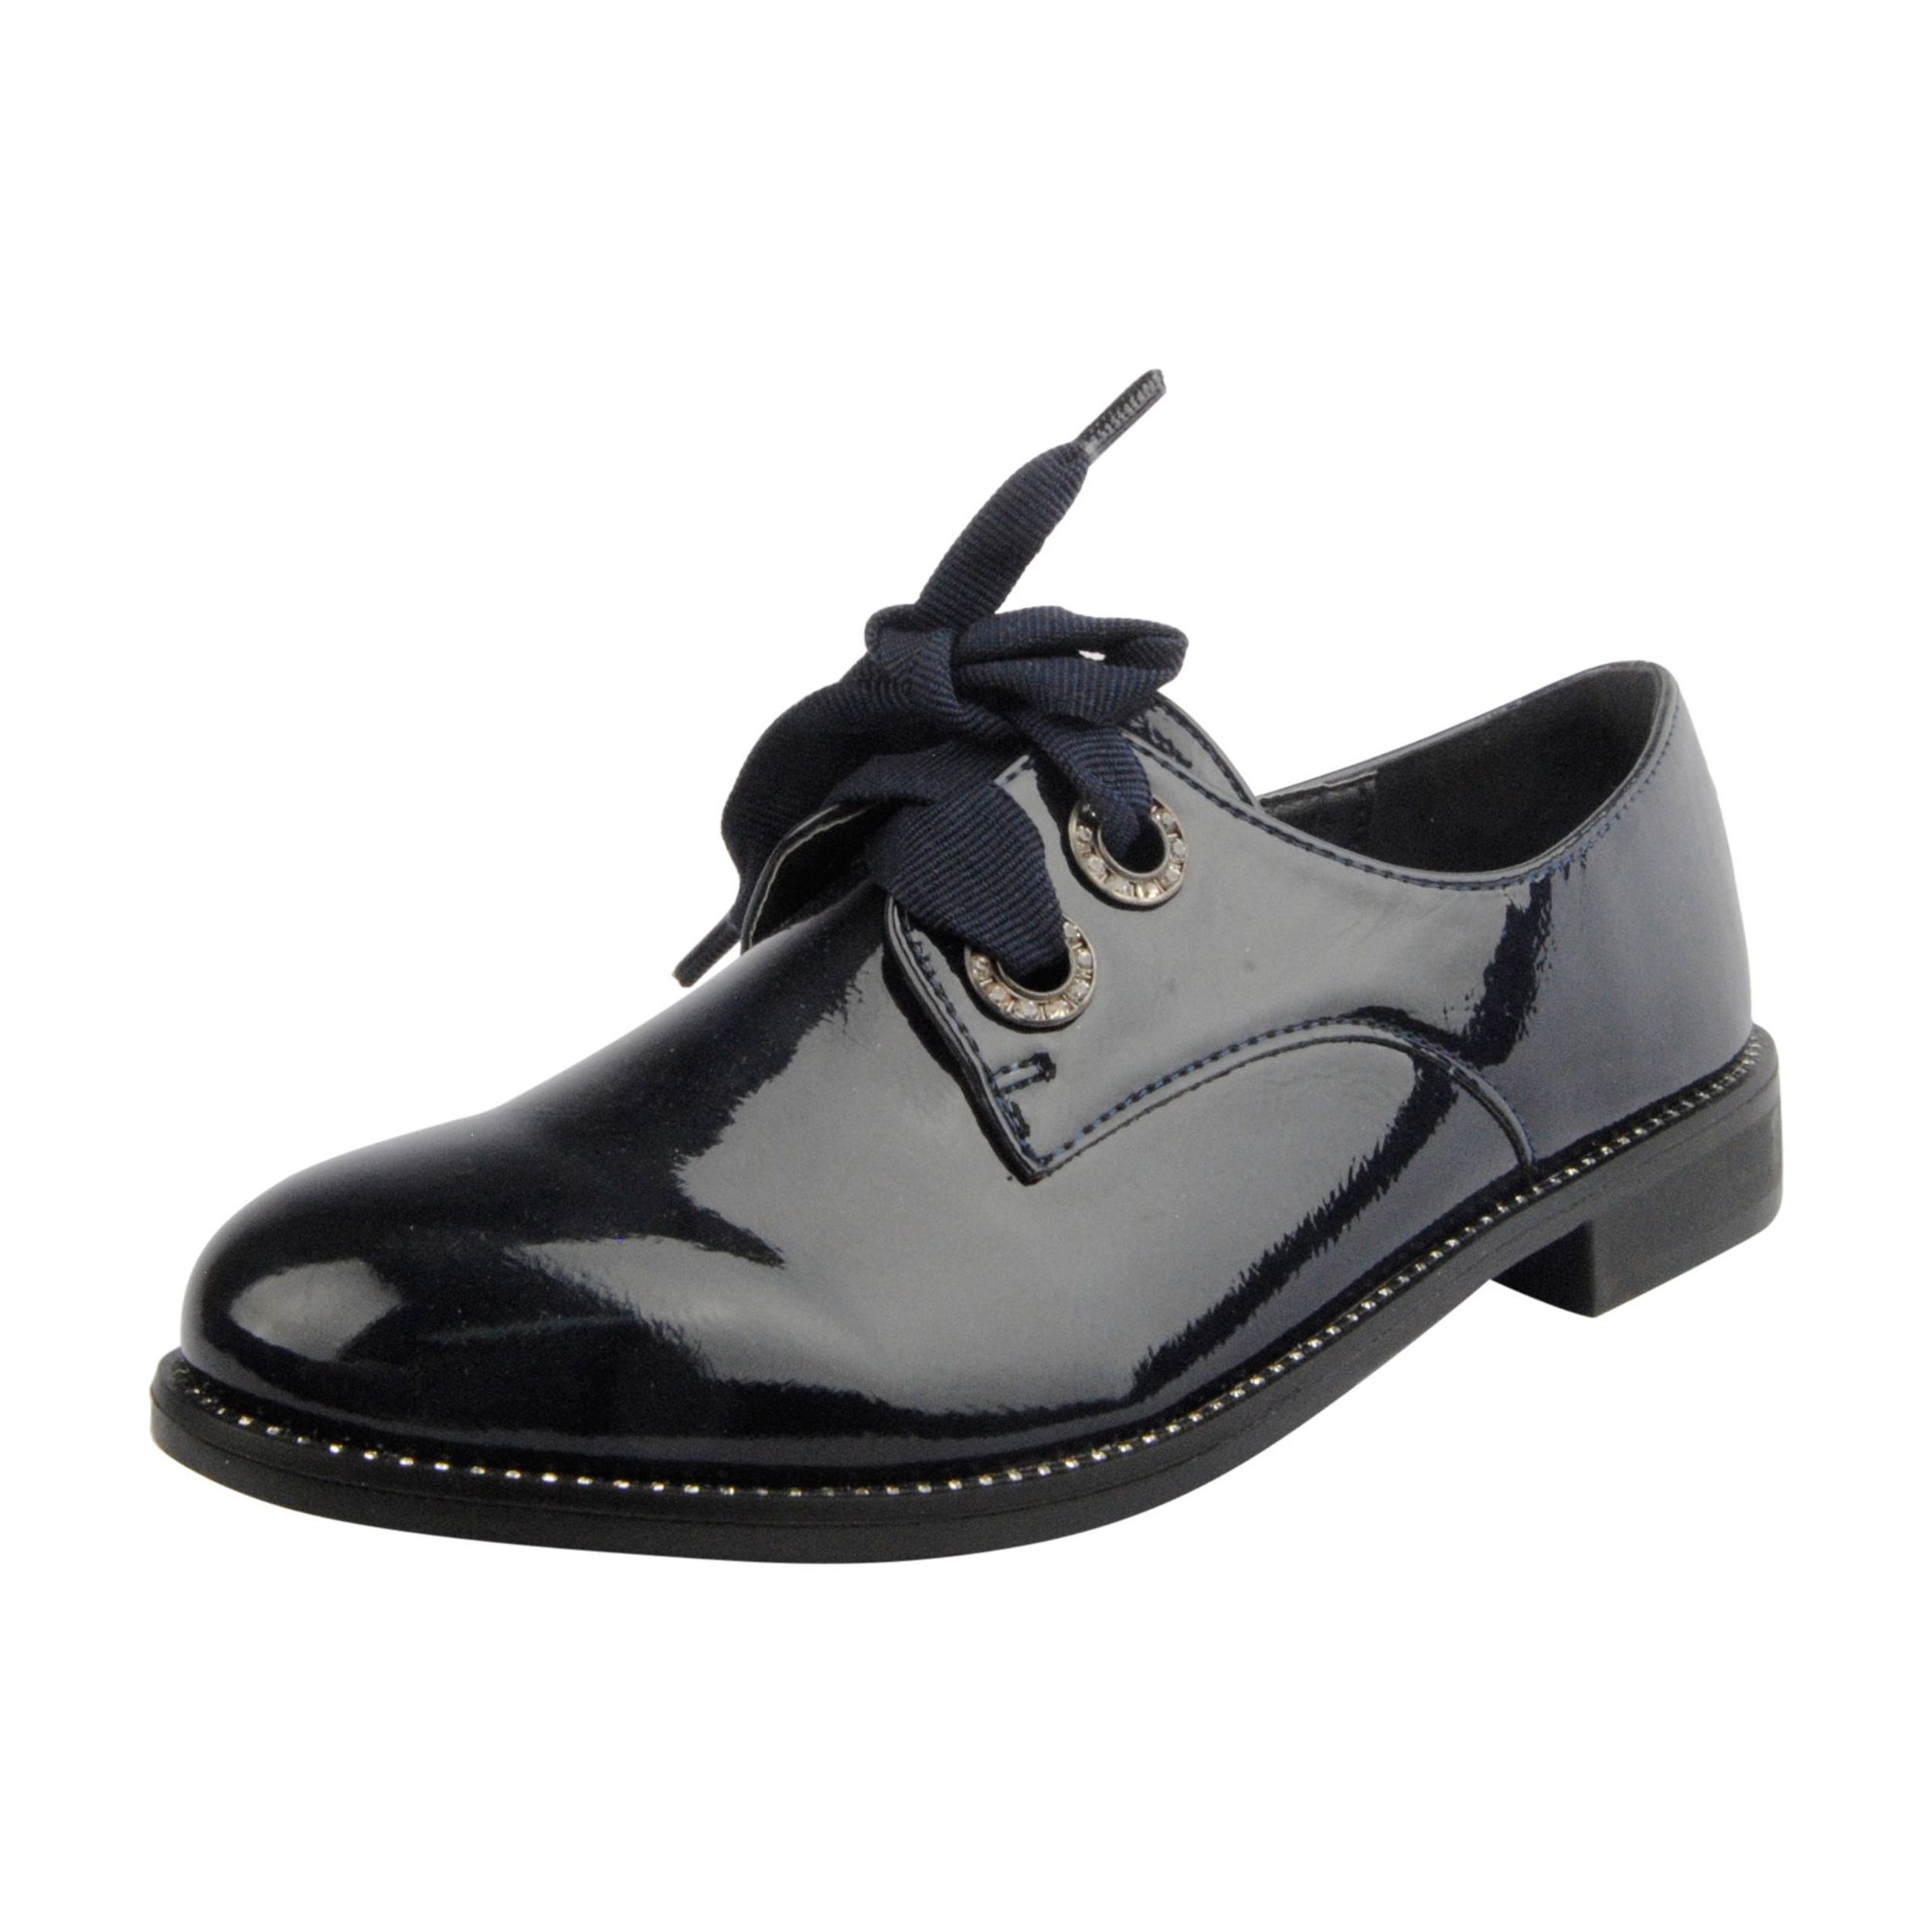 Lace Oxford Shoe and details in the eyelets. Anti-slip rubber floor. Interior exterior and template of synthetic material.